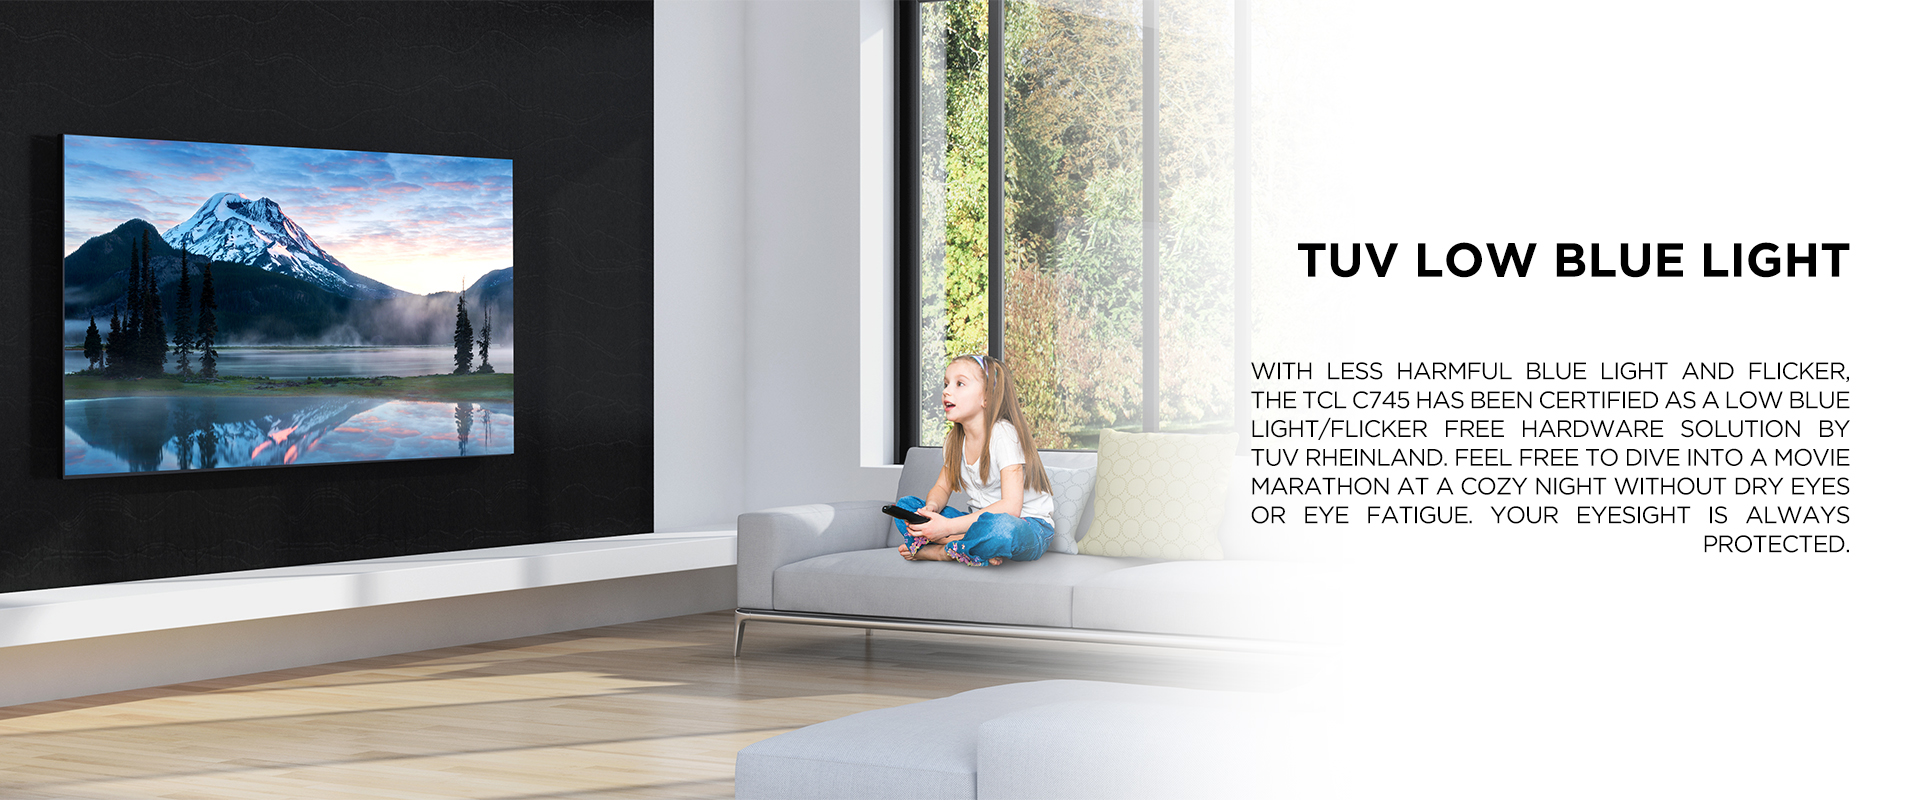 TUV Low Blue Light - With less harmful blue light and flicker, the TCL C745 has been certified as a low blue light/flicker free hardware solution by TUV Rheinland. Feel free to dive into a movie marathon at a cozy night without dry eyes or eye fatigue. Your eyesight is always protected.